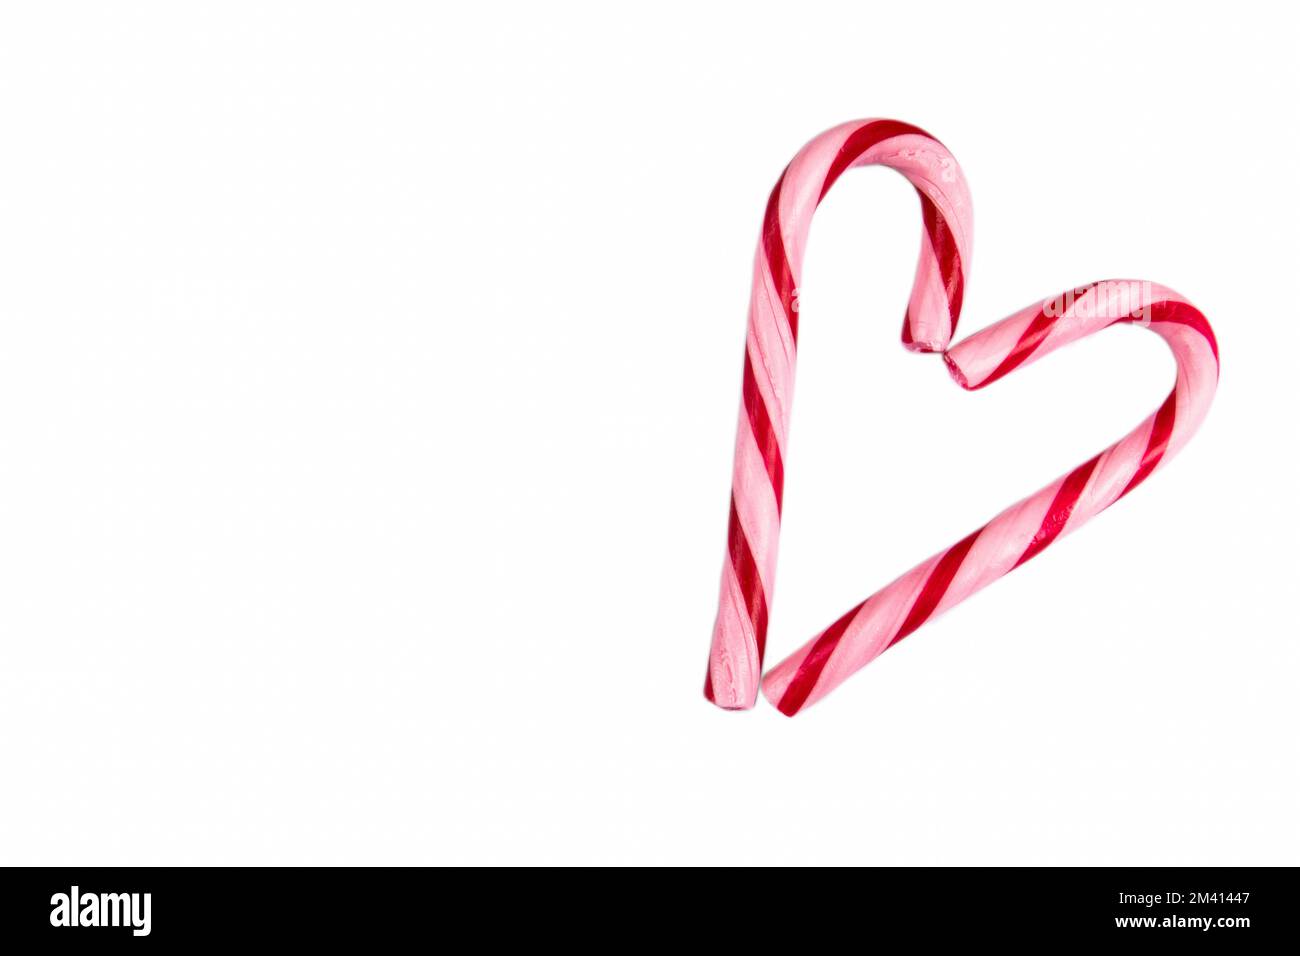 Heart shaped candy cane isolated on a white background. Stock Photo